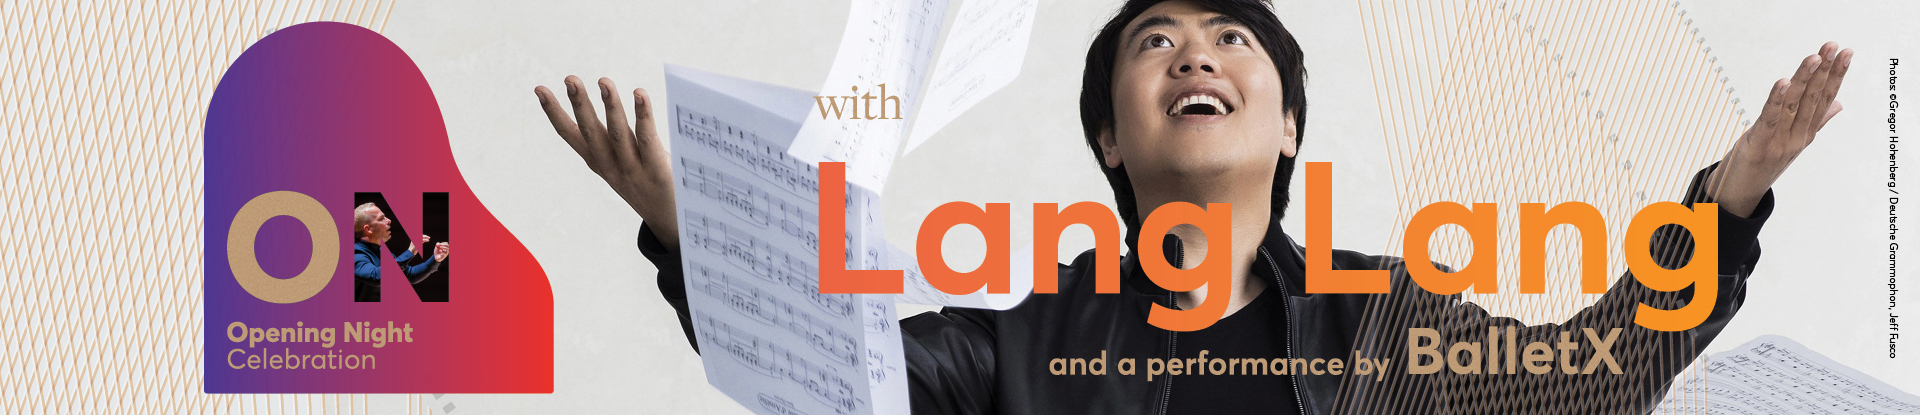 Opening Night Banner featuring imagery of Yannick and Lang Lang